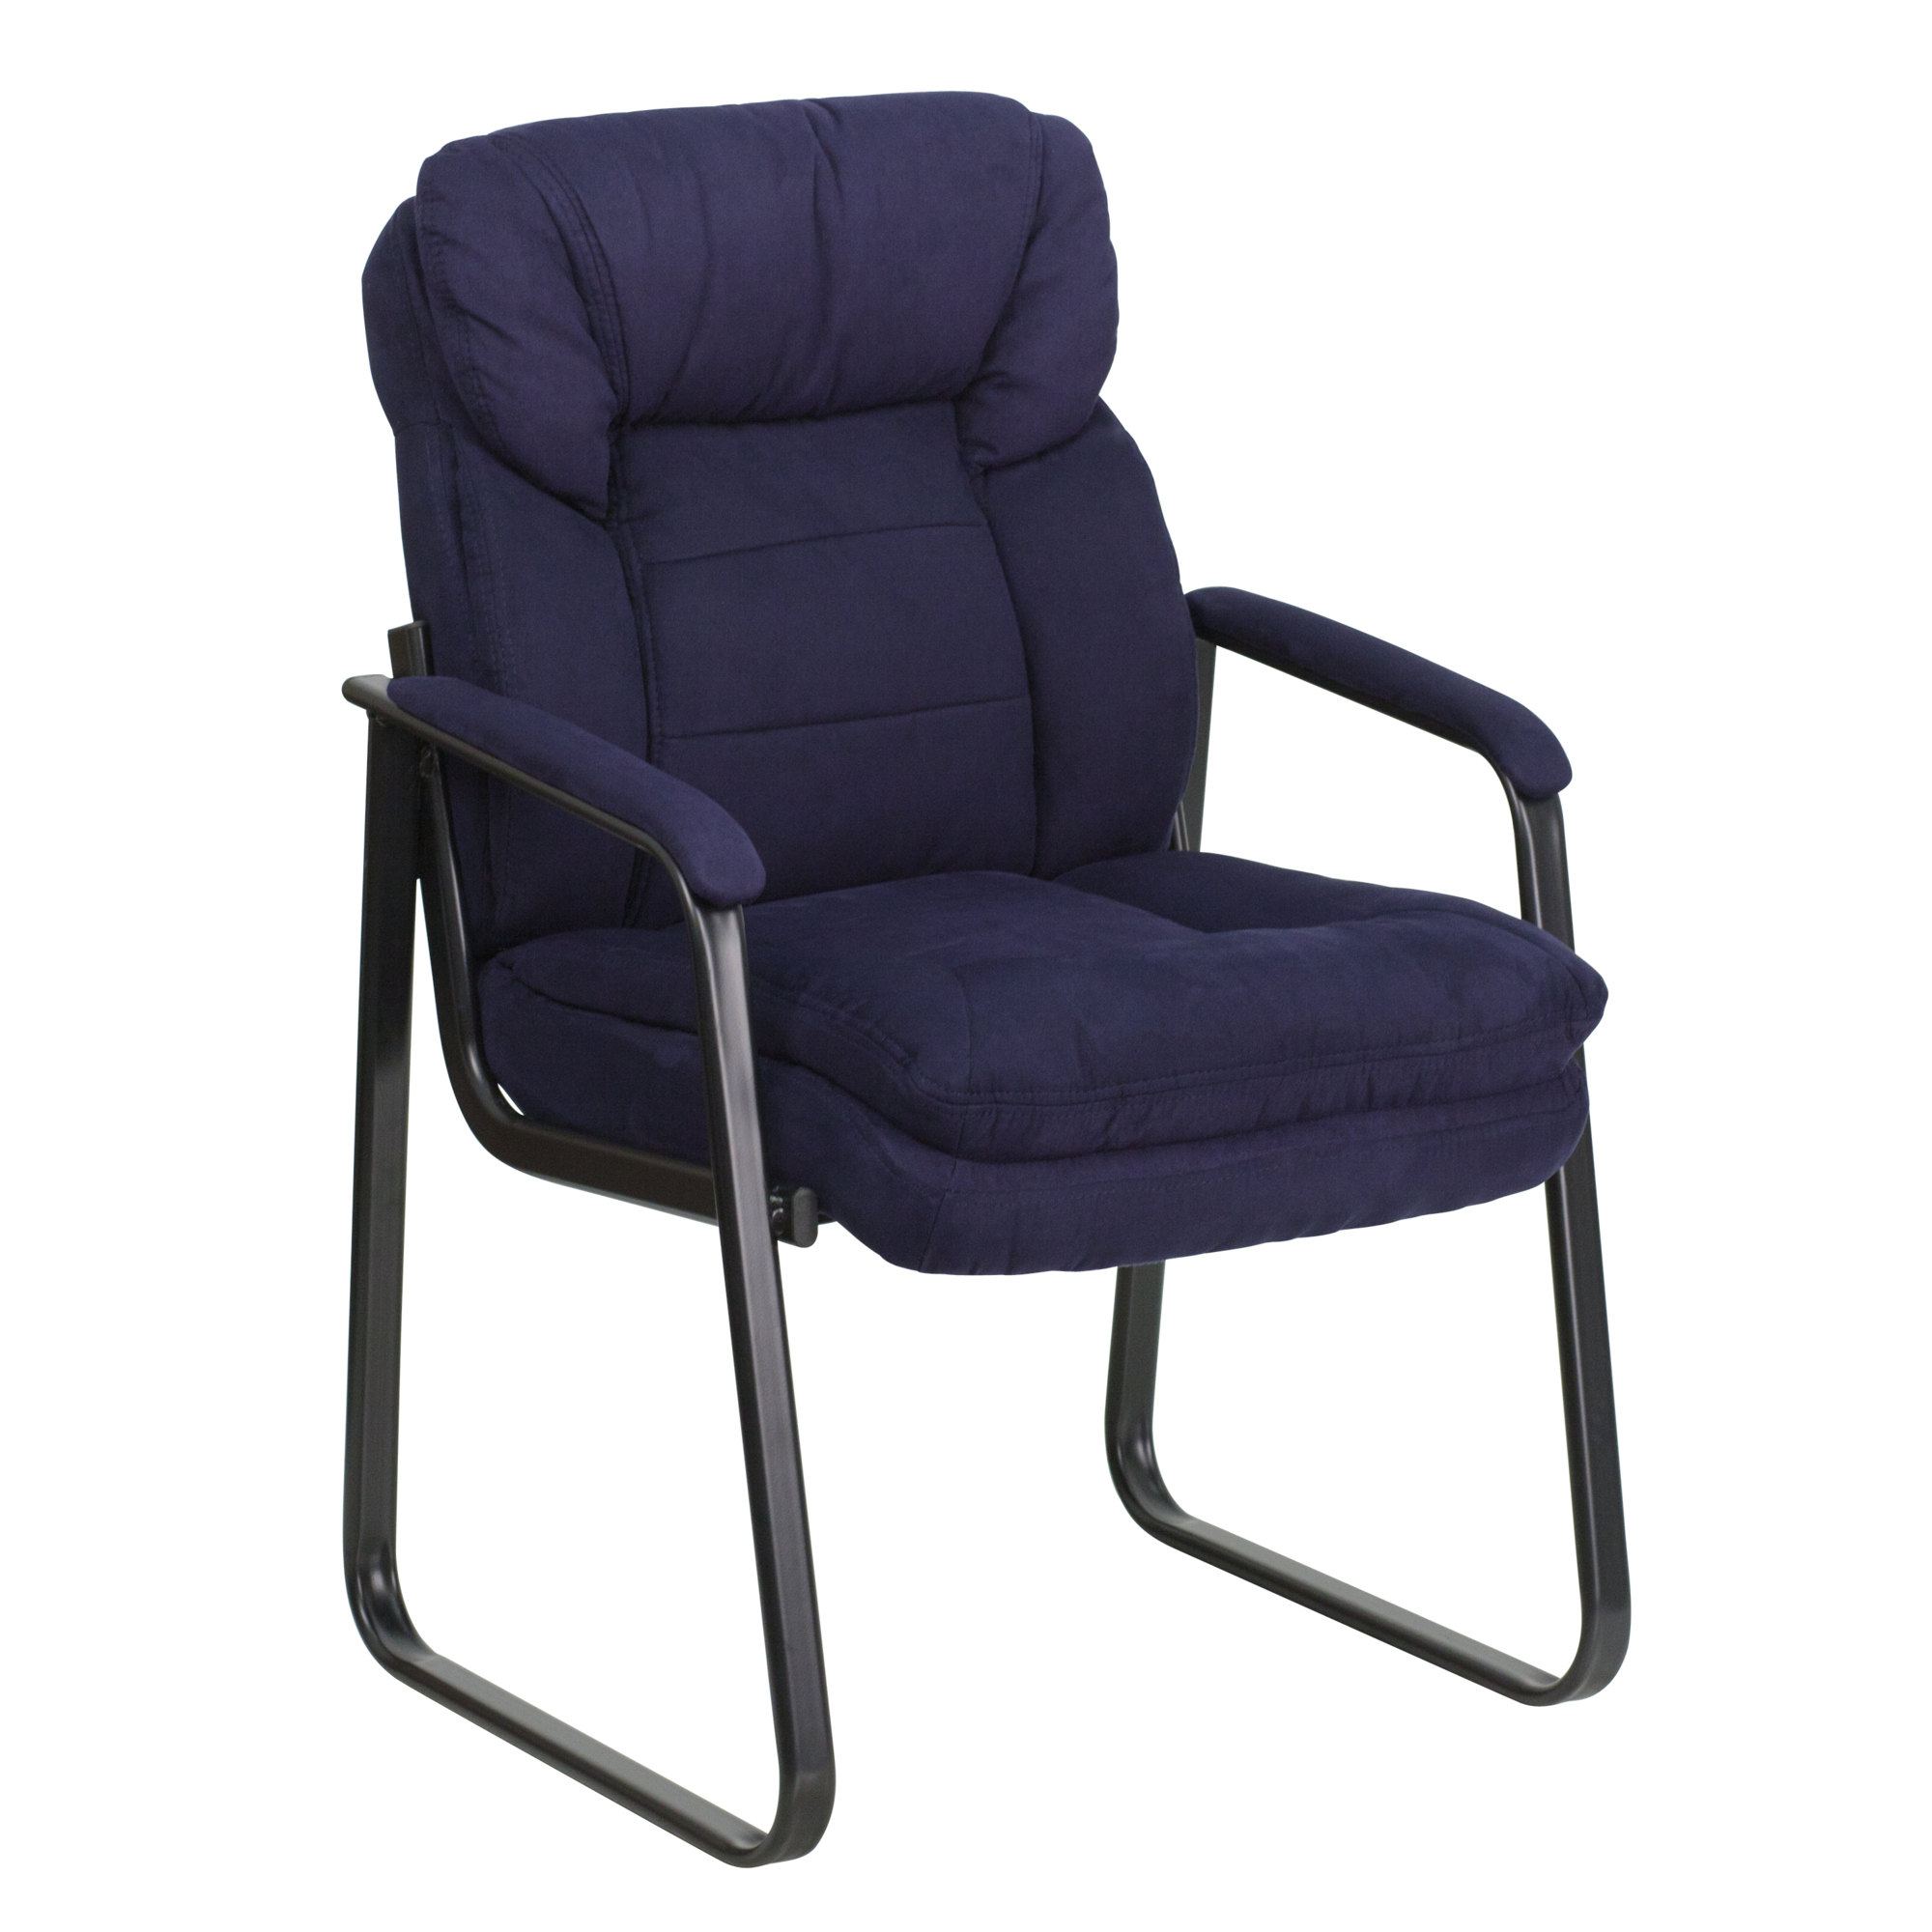 Flash Furniture, Navy Microfiber Executive Chair w/ Lumbar Support, Primary Color Blue, Included (qty.) 1, Model GO1156NVY